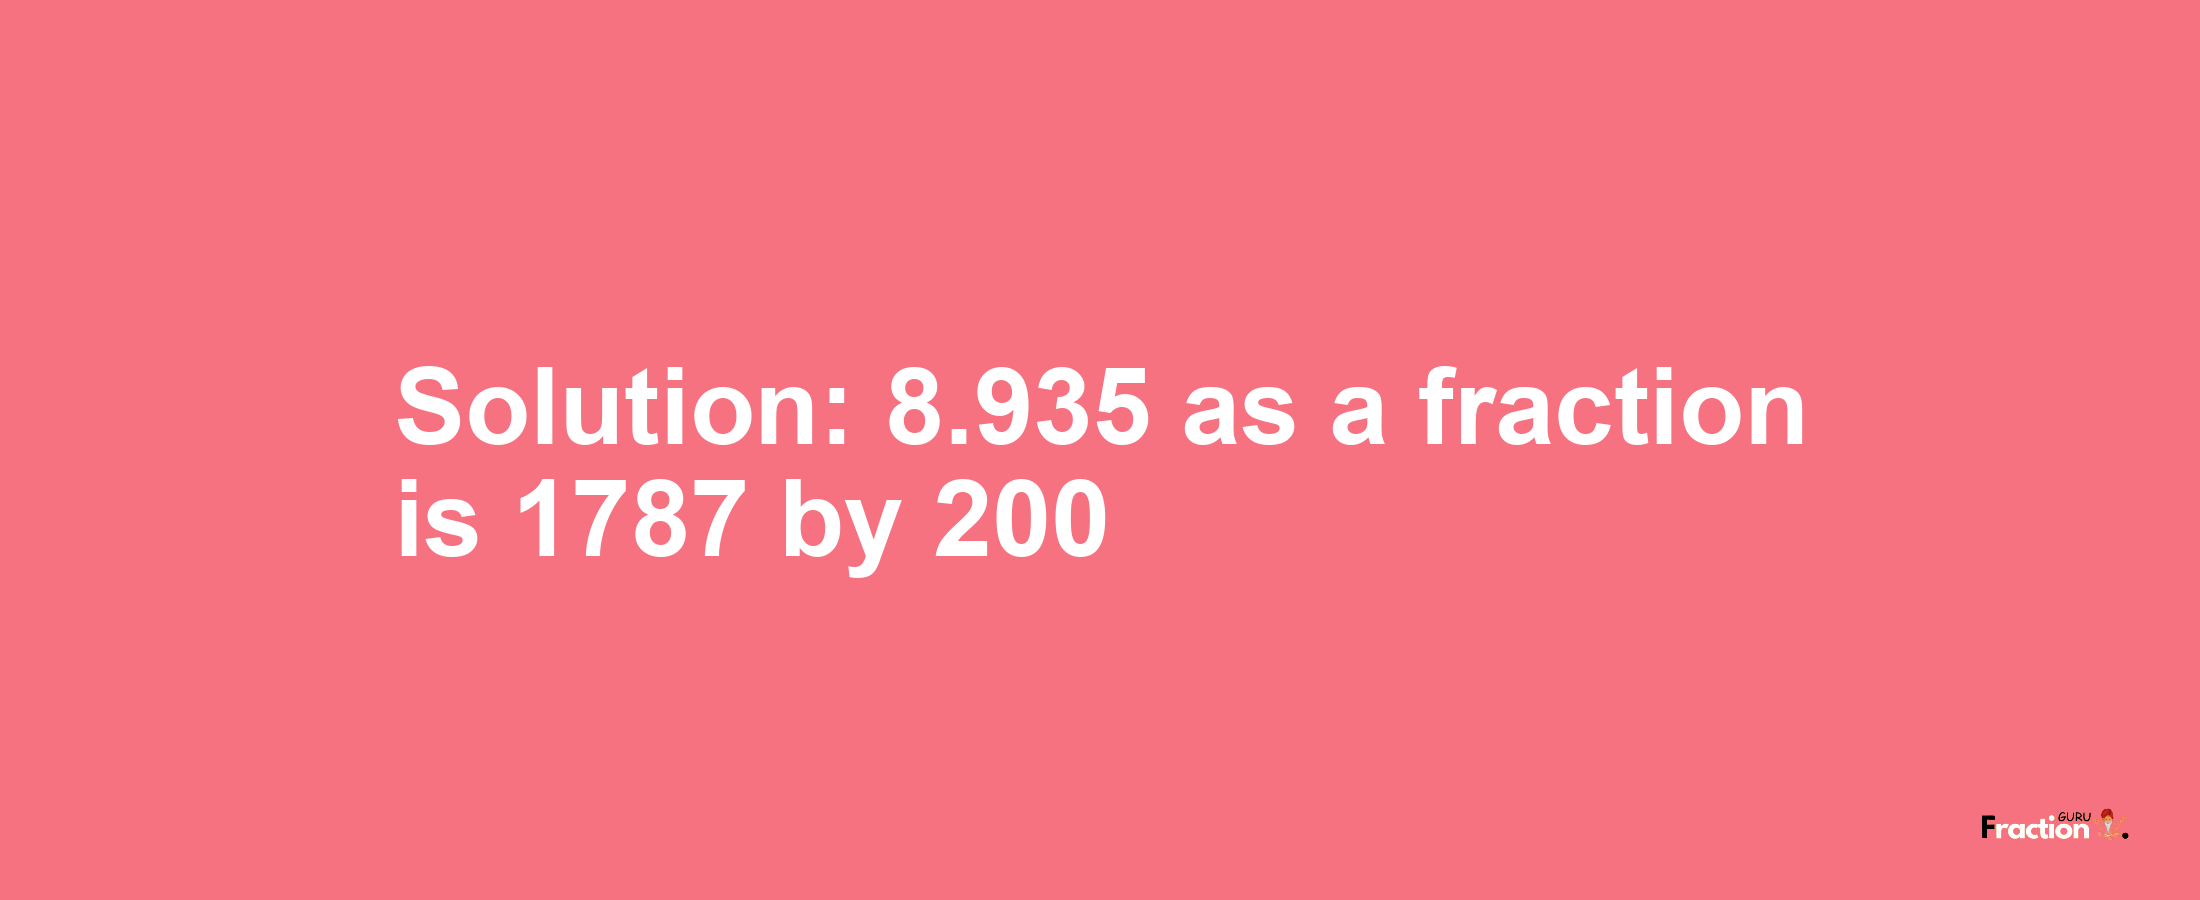 Solution:8.935 as a fraction is 1787/200